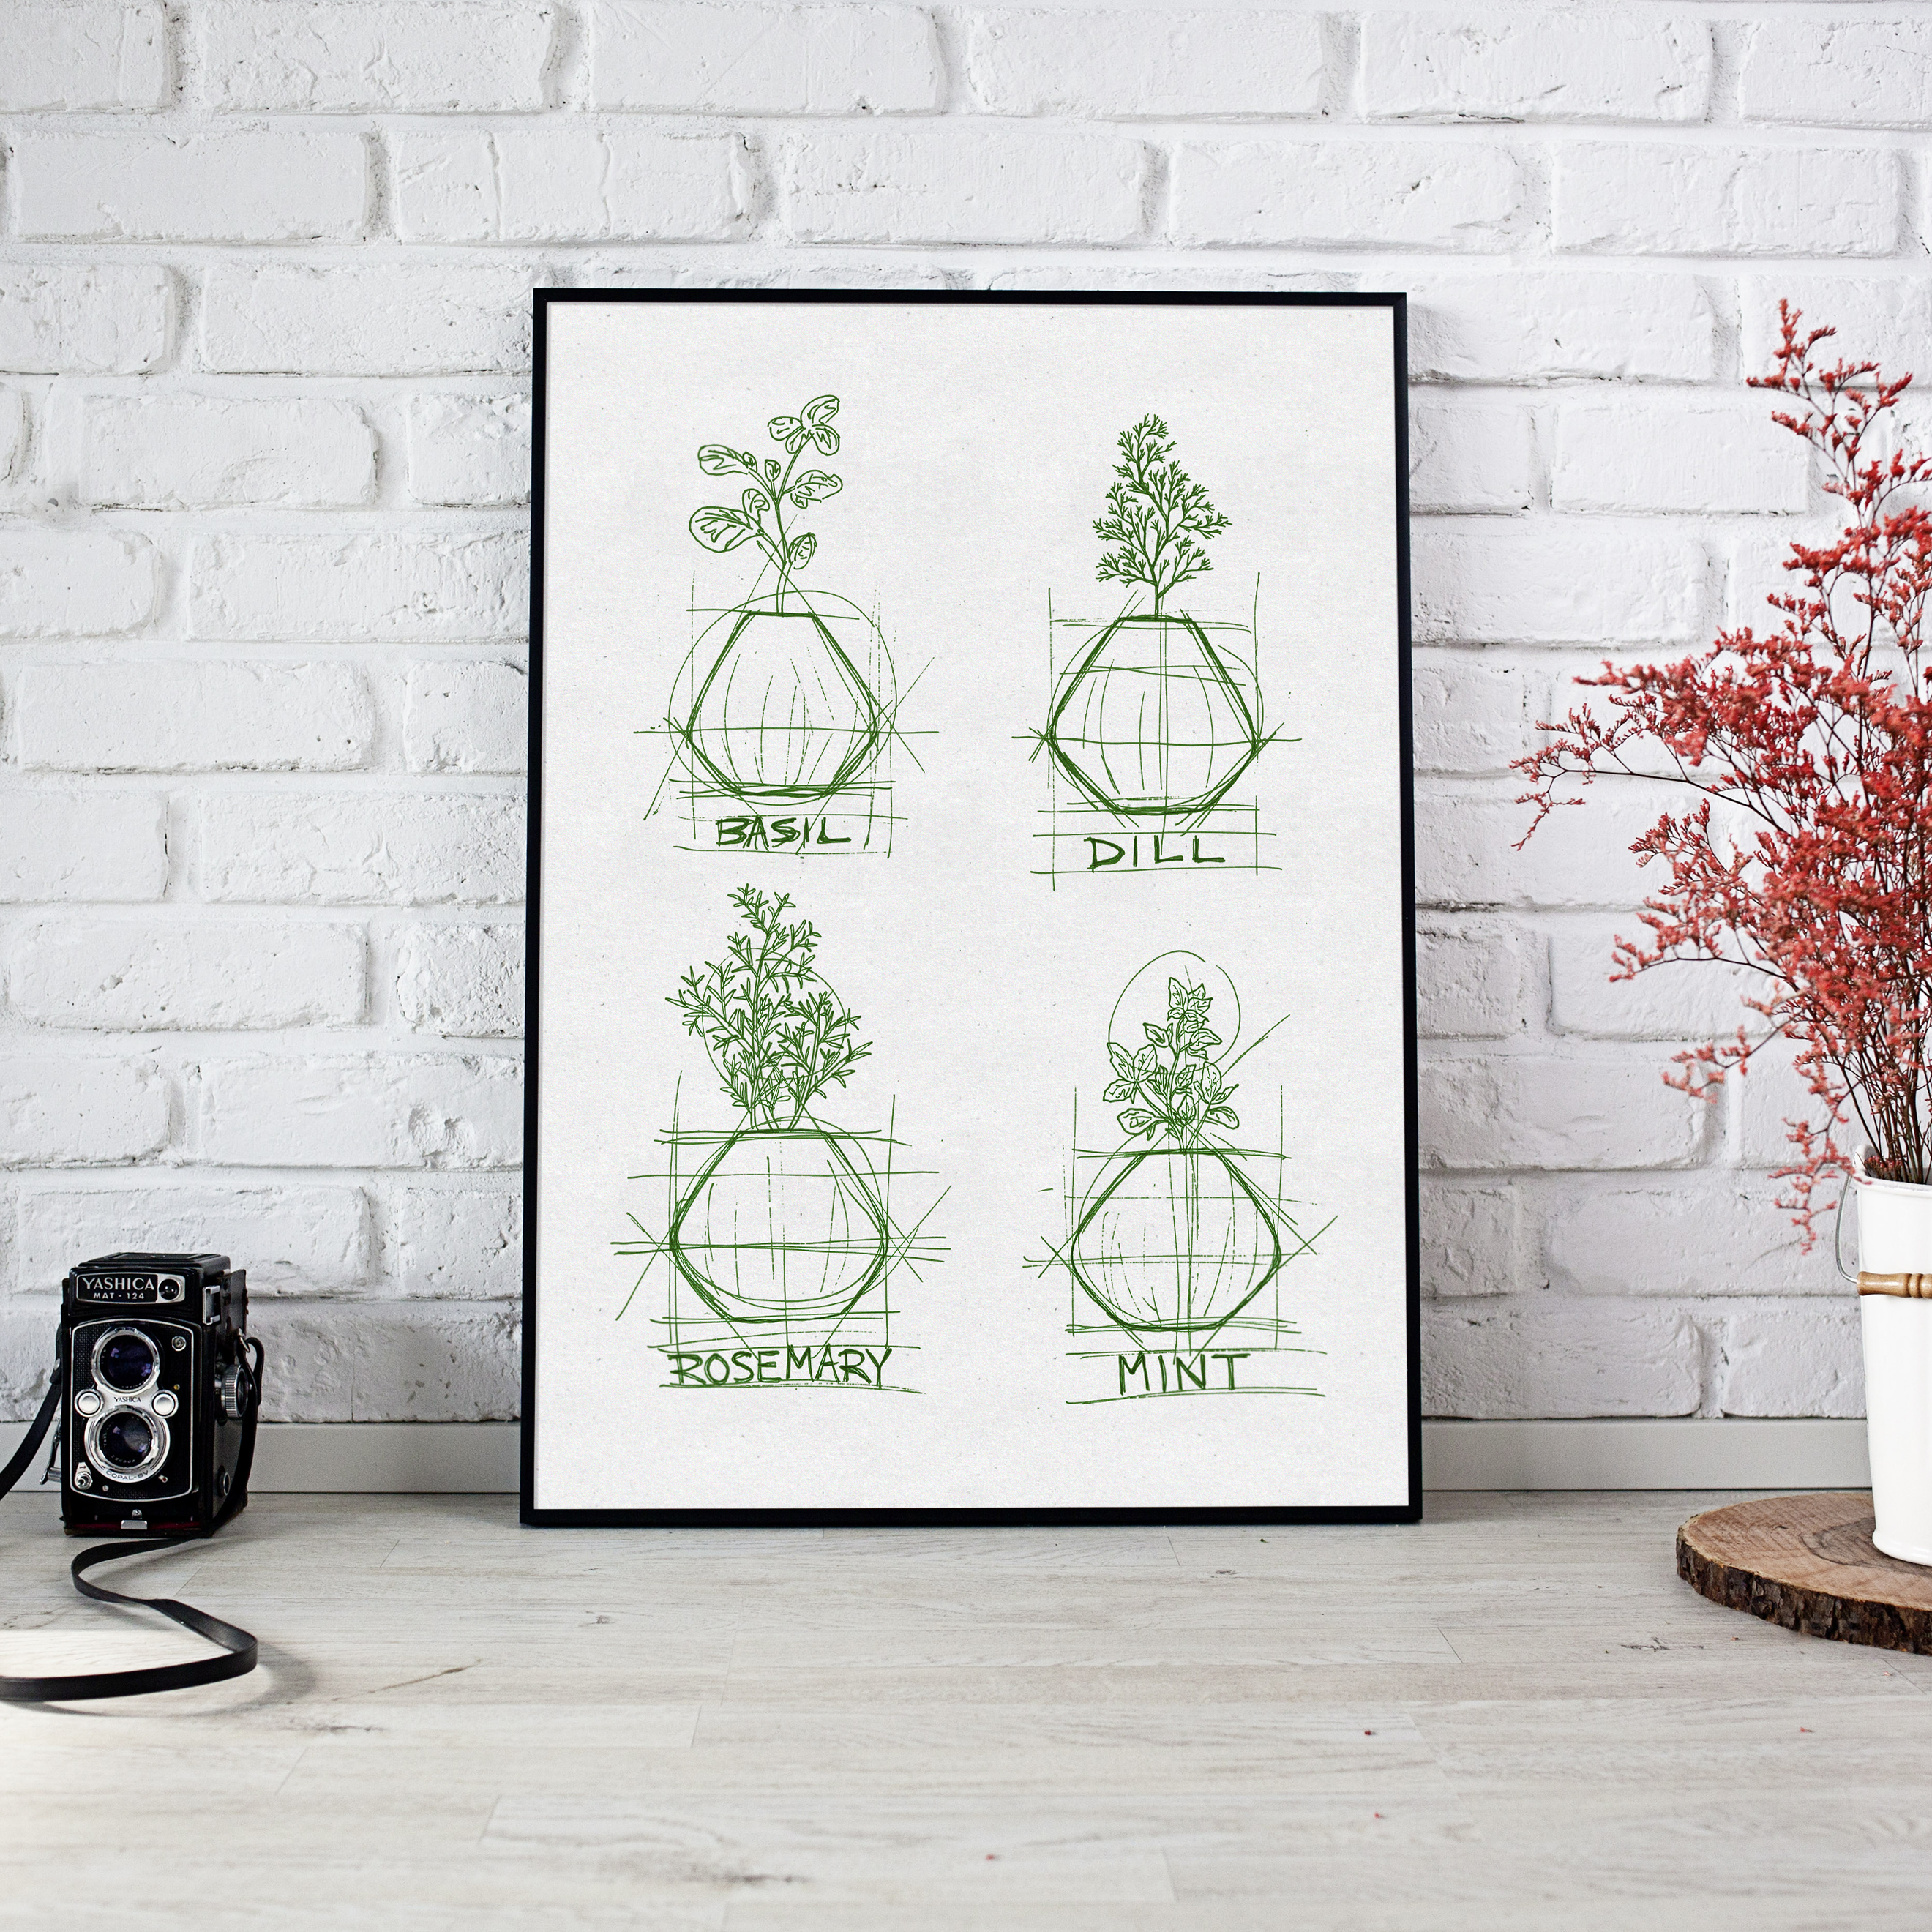 Technical sketches of basil, dill, rosemary and mint, framed.